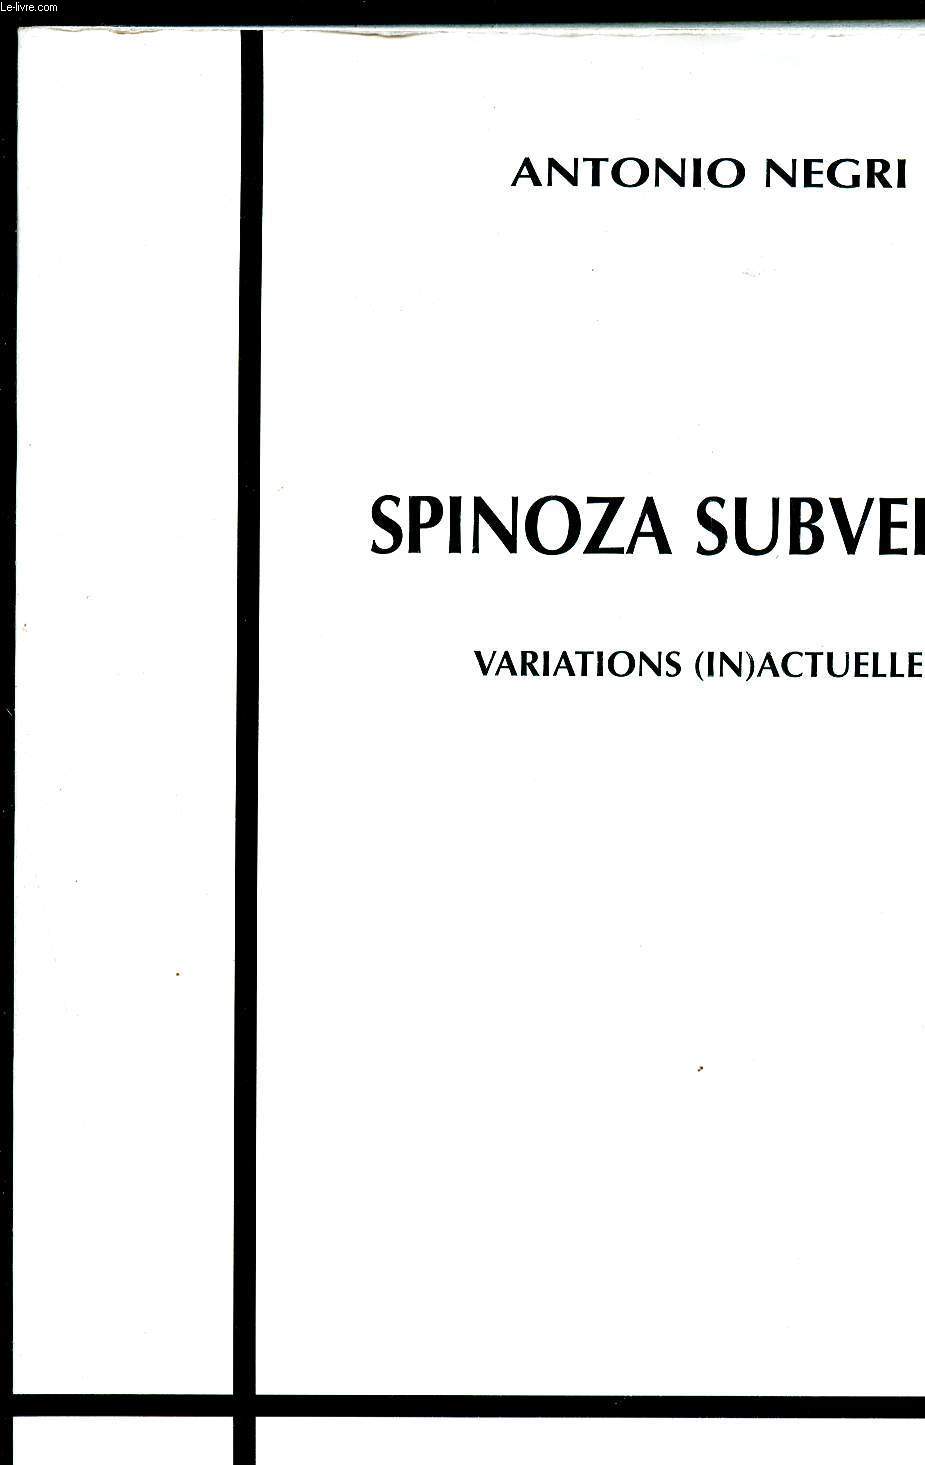 Spinosa Subversif - variations (in)actuelles